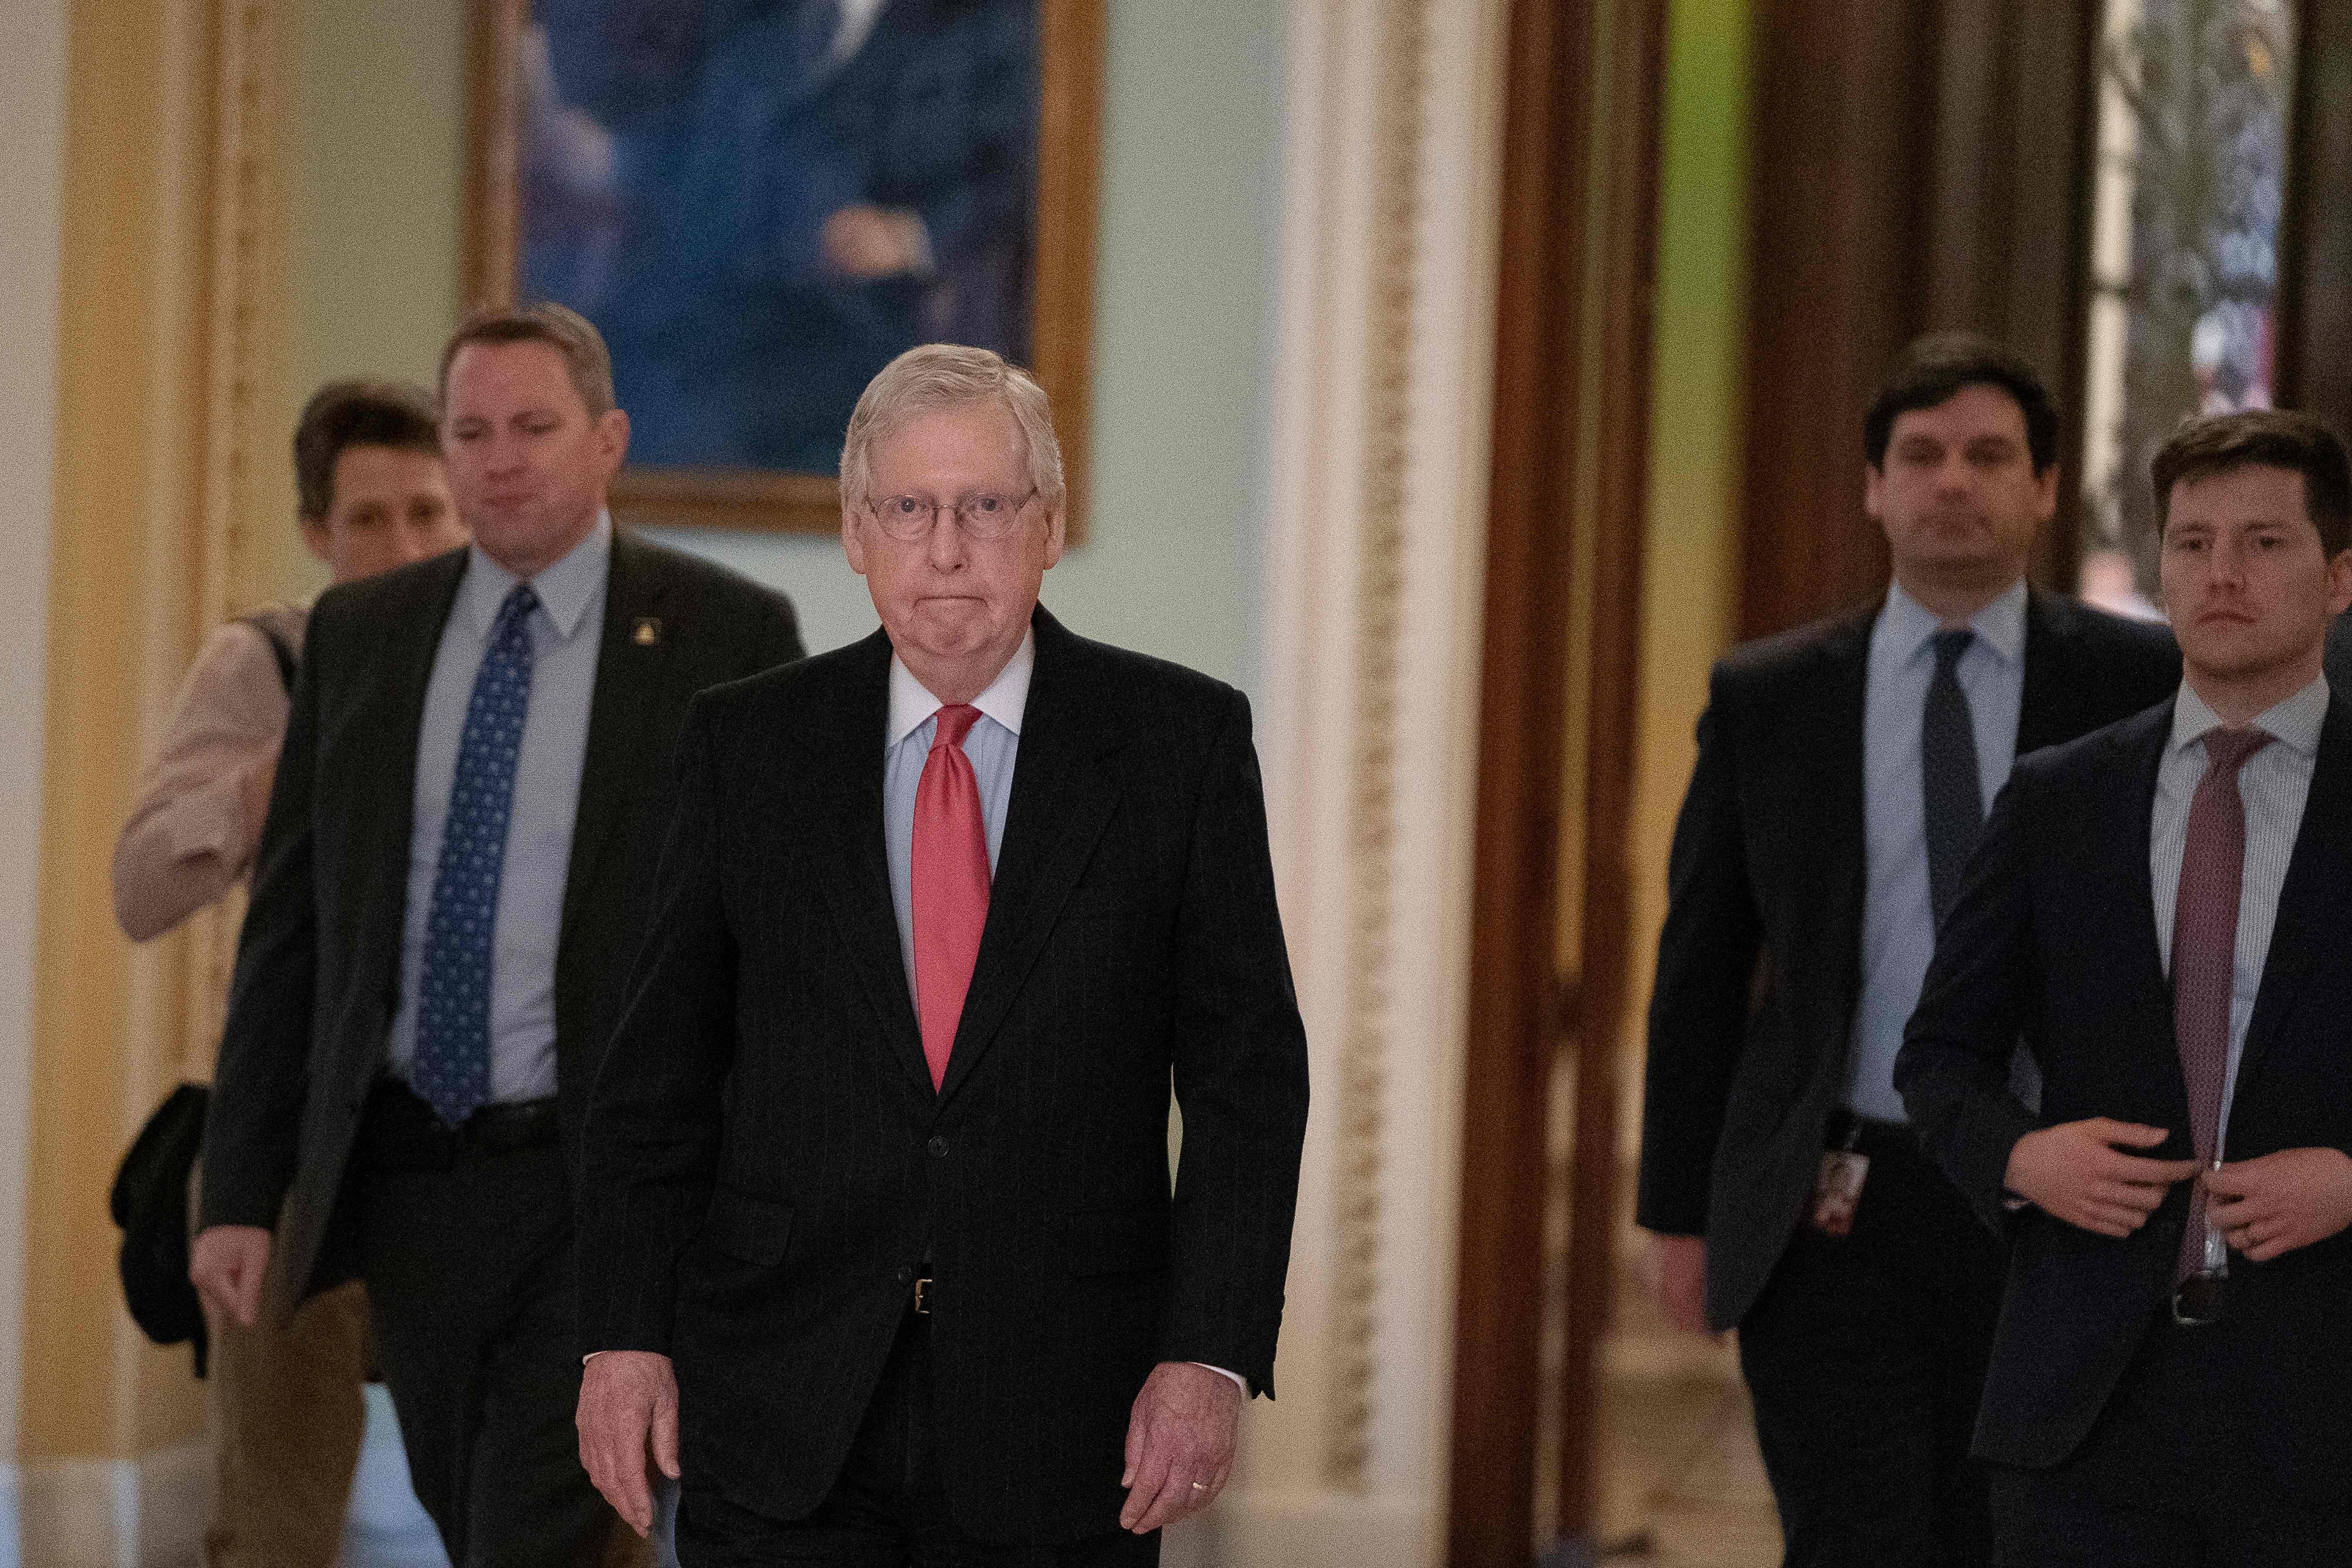 Mitch McConnell walking through the halls of Congress with other men around him